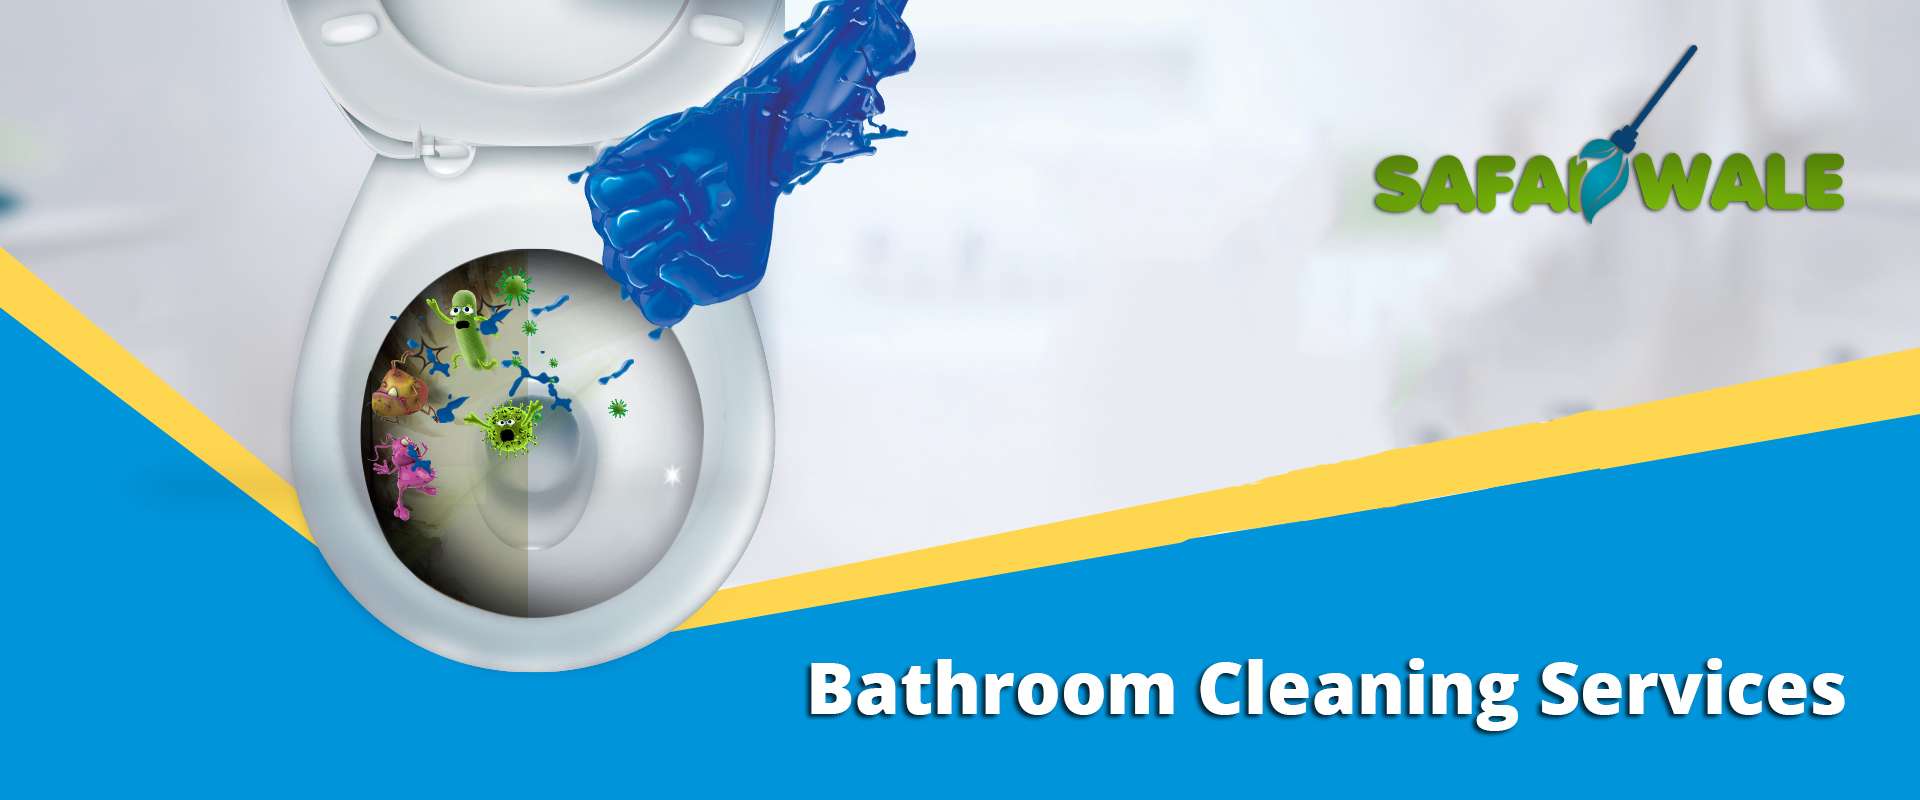 bathroom cleaning services in mumbai